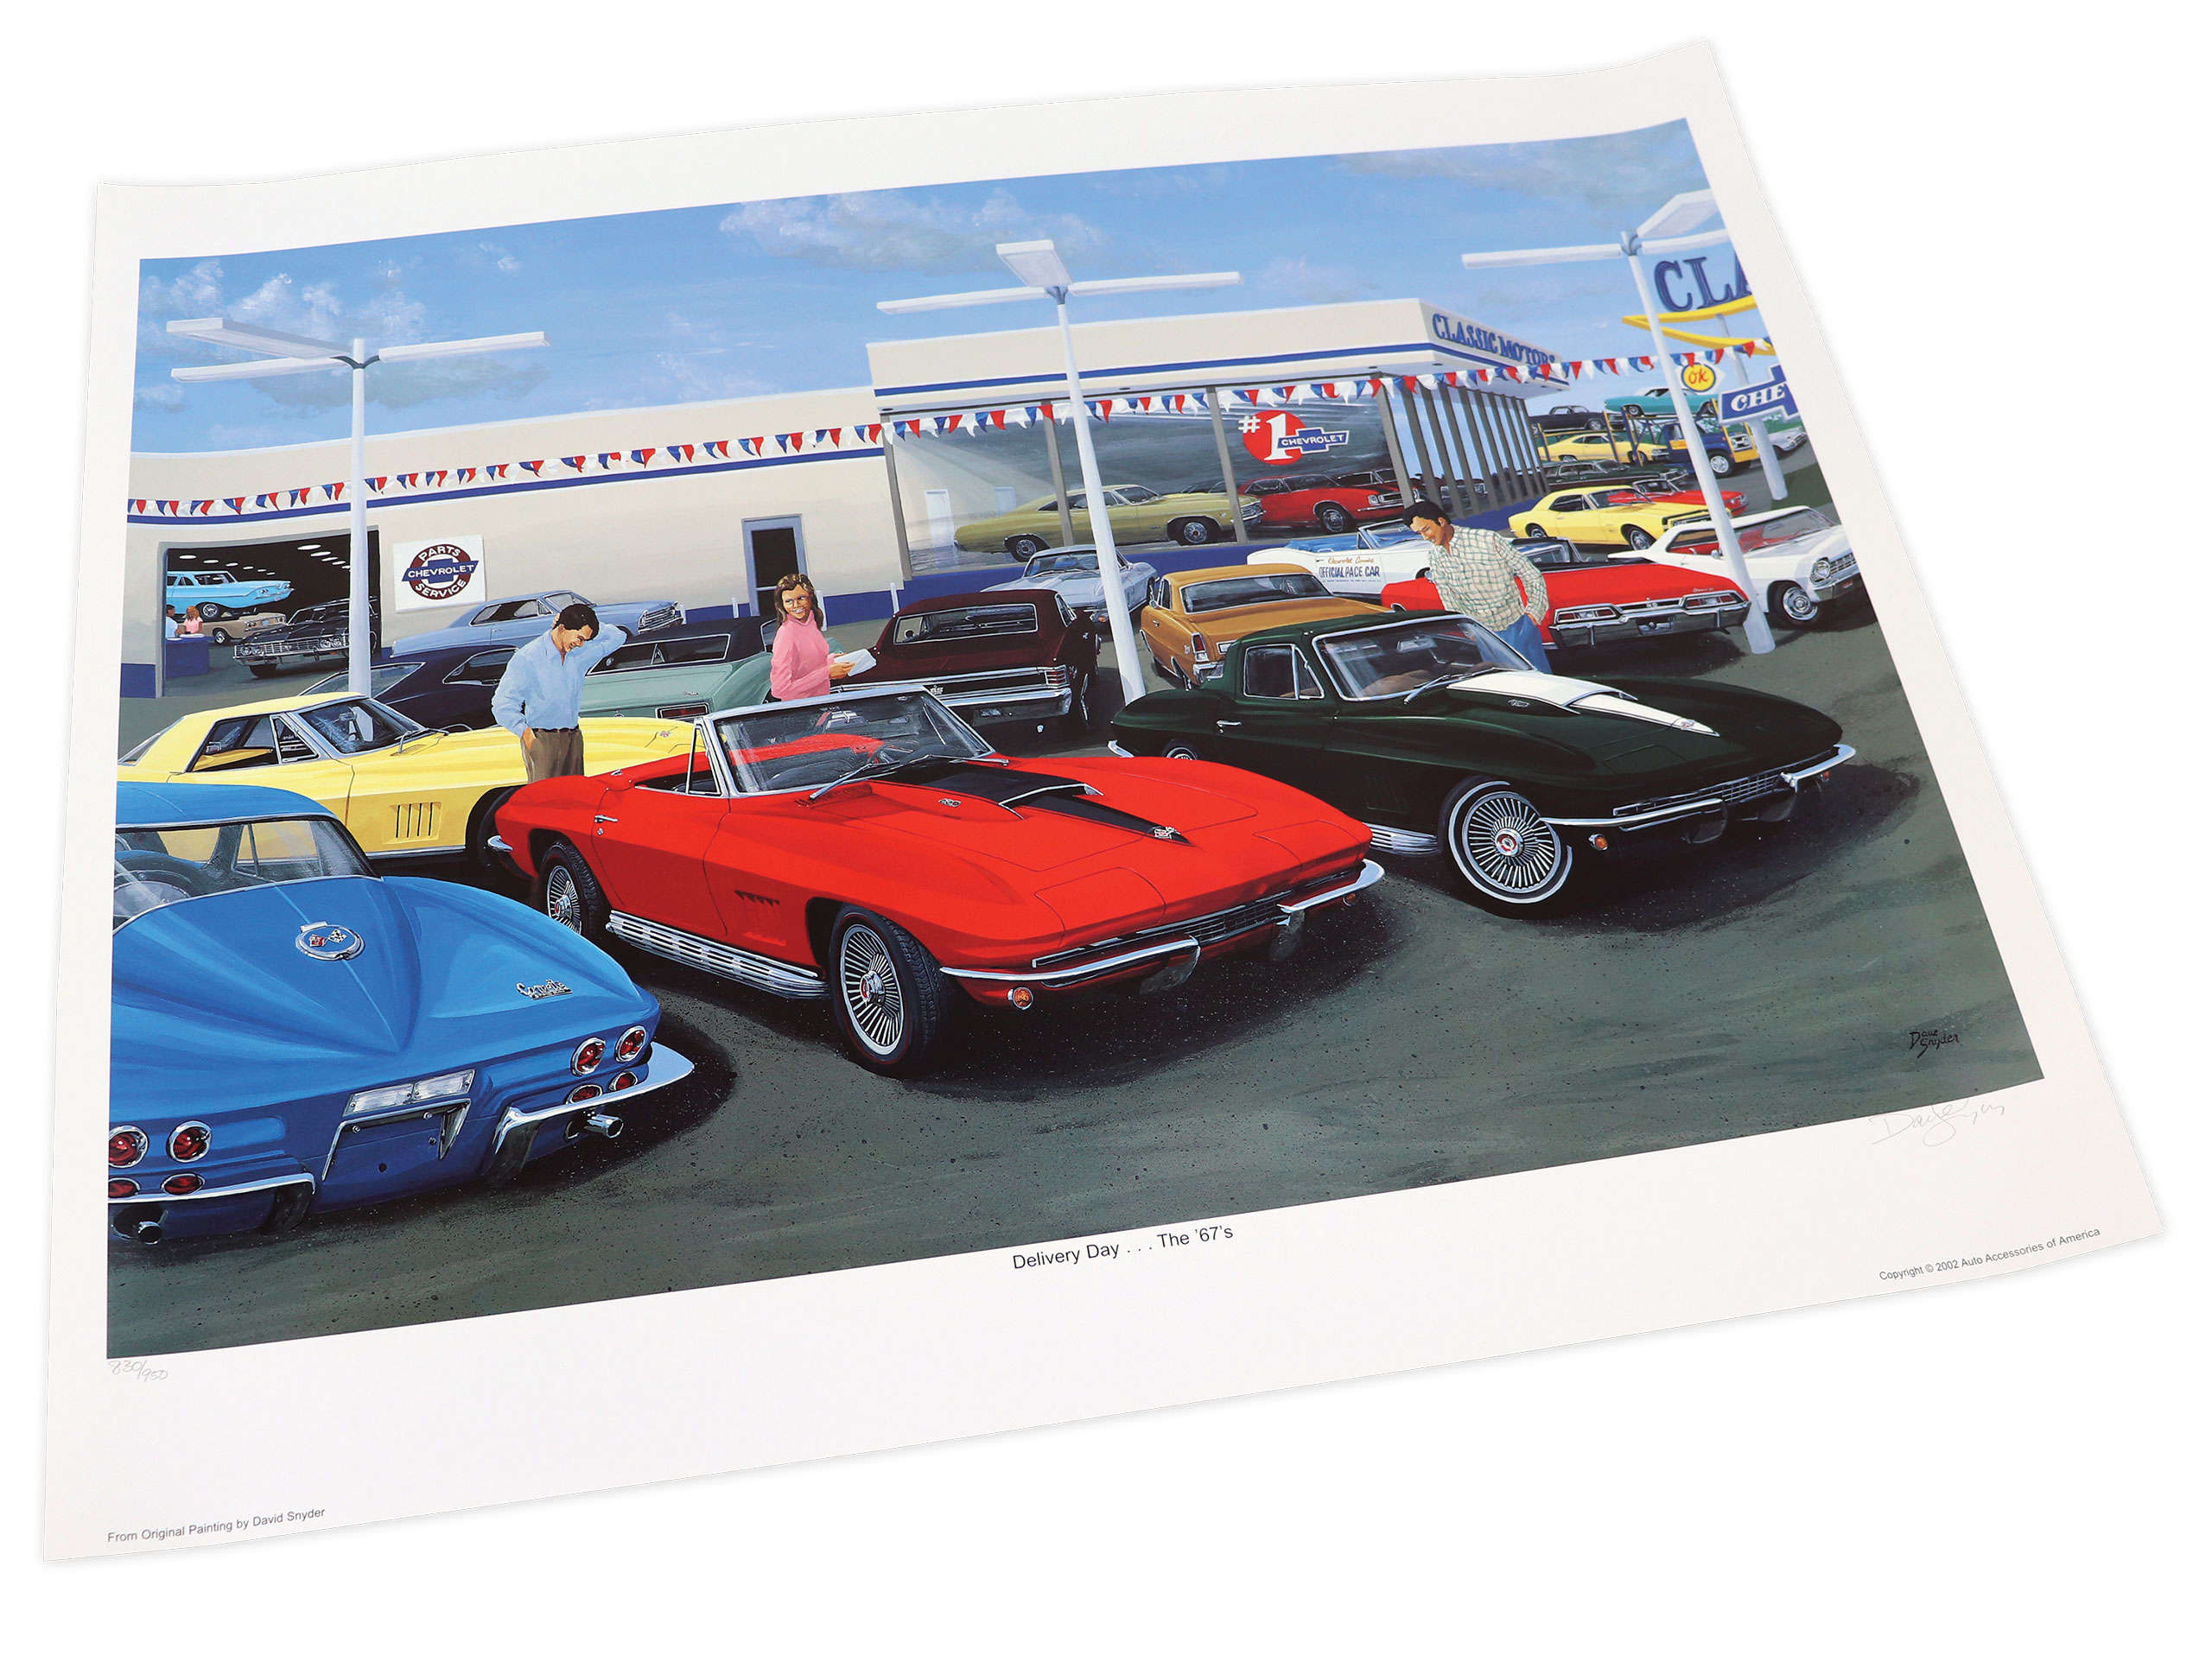 C2 1967 Chevrolet Corvette Delivery Day: The 67's Limited Edition Print - David Snyder